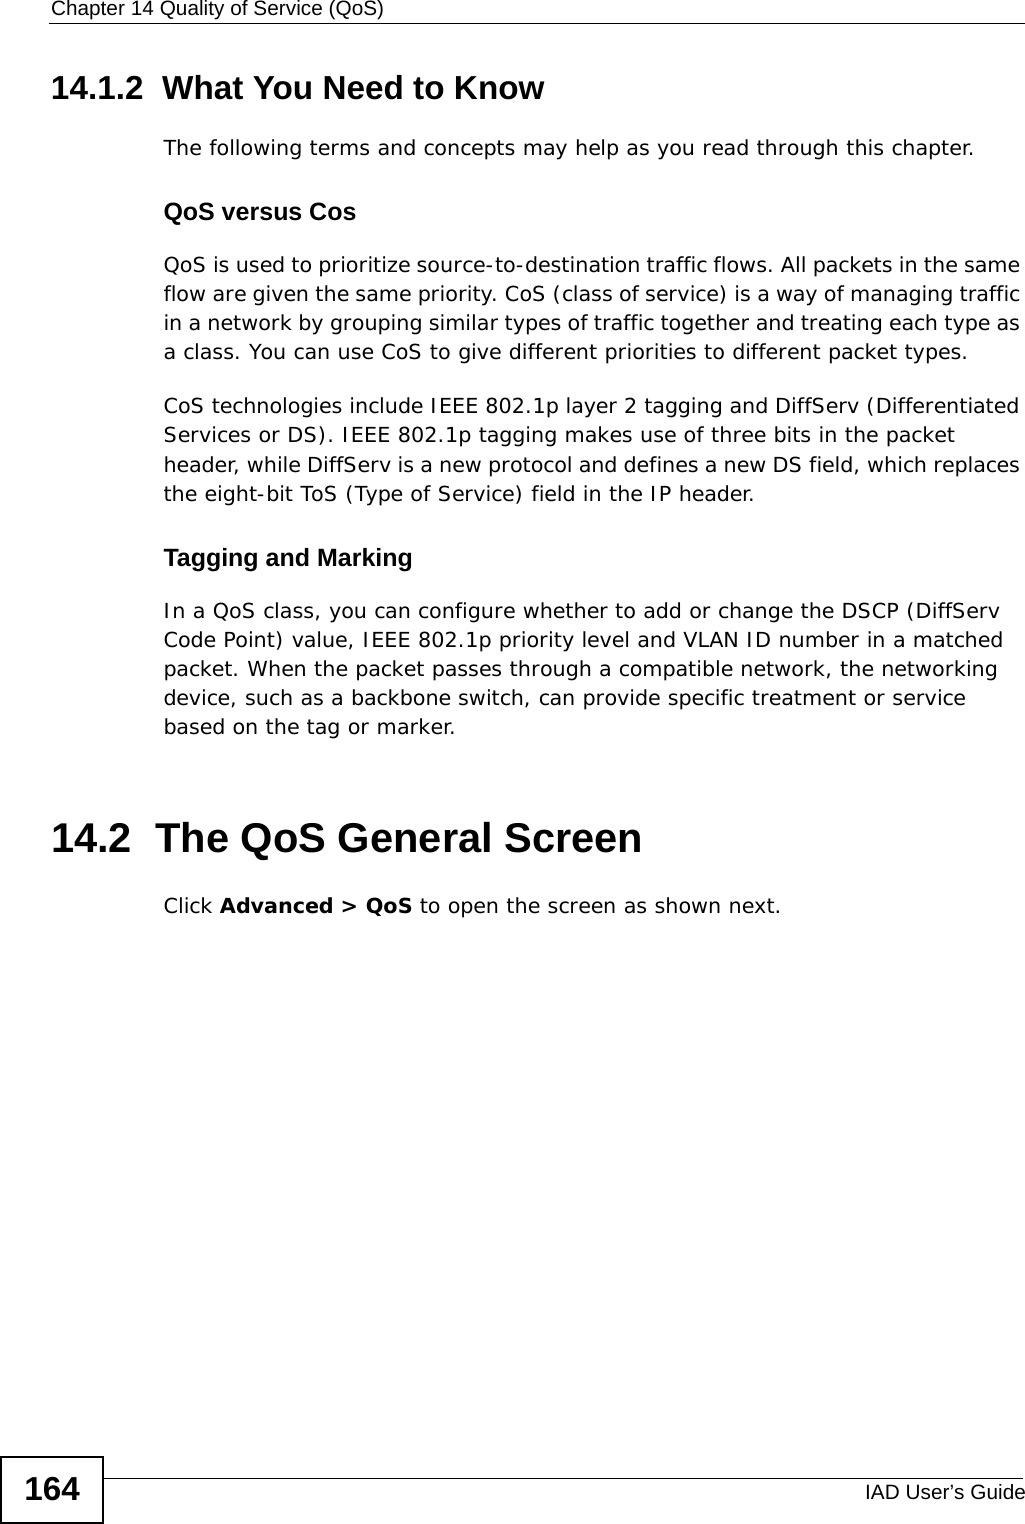 Chapter 14 Quality of Service (QoS)IAD User’s Guide16414.1.2  What You Need to KnowThe following terms and concepts may help as you read through this chapter.QoS versus CosQoS is used to prioritize source-to-destination traffic flows. All packets in the same flow are given the same priority. CoS (class of service) is a way of managing traffic in a network by grouping similar types of traffic together and treating each type as a class. You can use CoS to give different priorities to different packet types. CoS technologies include IEEE 802.1p layer 2 tagging and DiffServ (Differentiated Services or DS). IEEE 802.1p tagging makes use of three bits in the packet header, while DiffServ is a new protocol and defines a new DS field, which replaces the eight-bit ToS (Type of Service) field in the IP header. Tagging and MarkingIn a QoS class, you can configure whether to add or change the DSCP (DiffServ Code Point) value, IEEE 802.1p priority level and VLAN ID number in a matched packet. When the packet passes through a compatible network, the networking device, such as a backbone switch, can provide specific treatment or service based on the tag or marker.14.2  The QoS General Screen Click Advanced &gt; QoS to open the screen as shown next. 